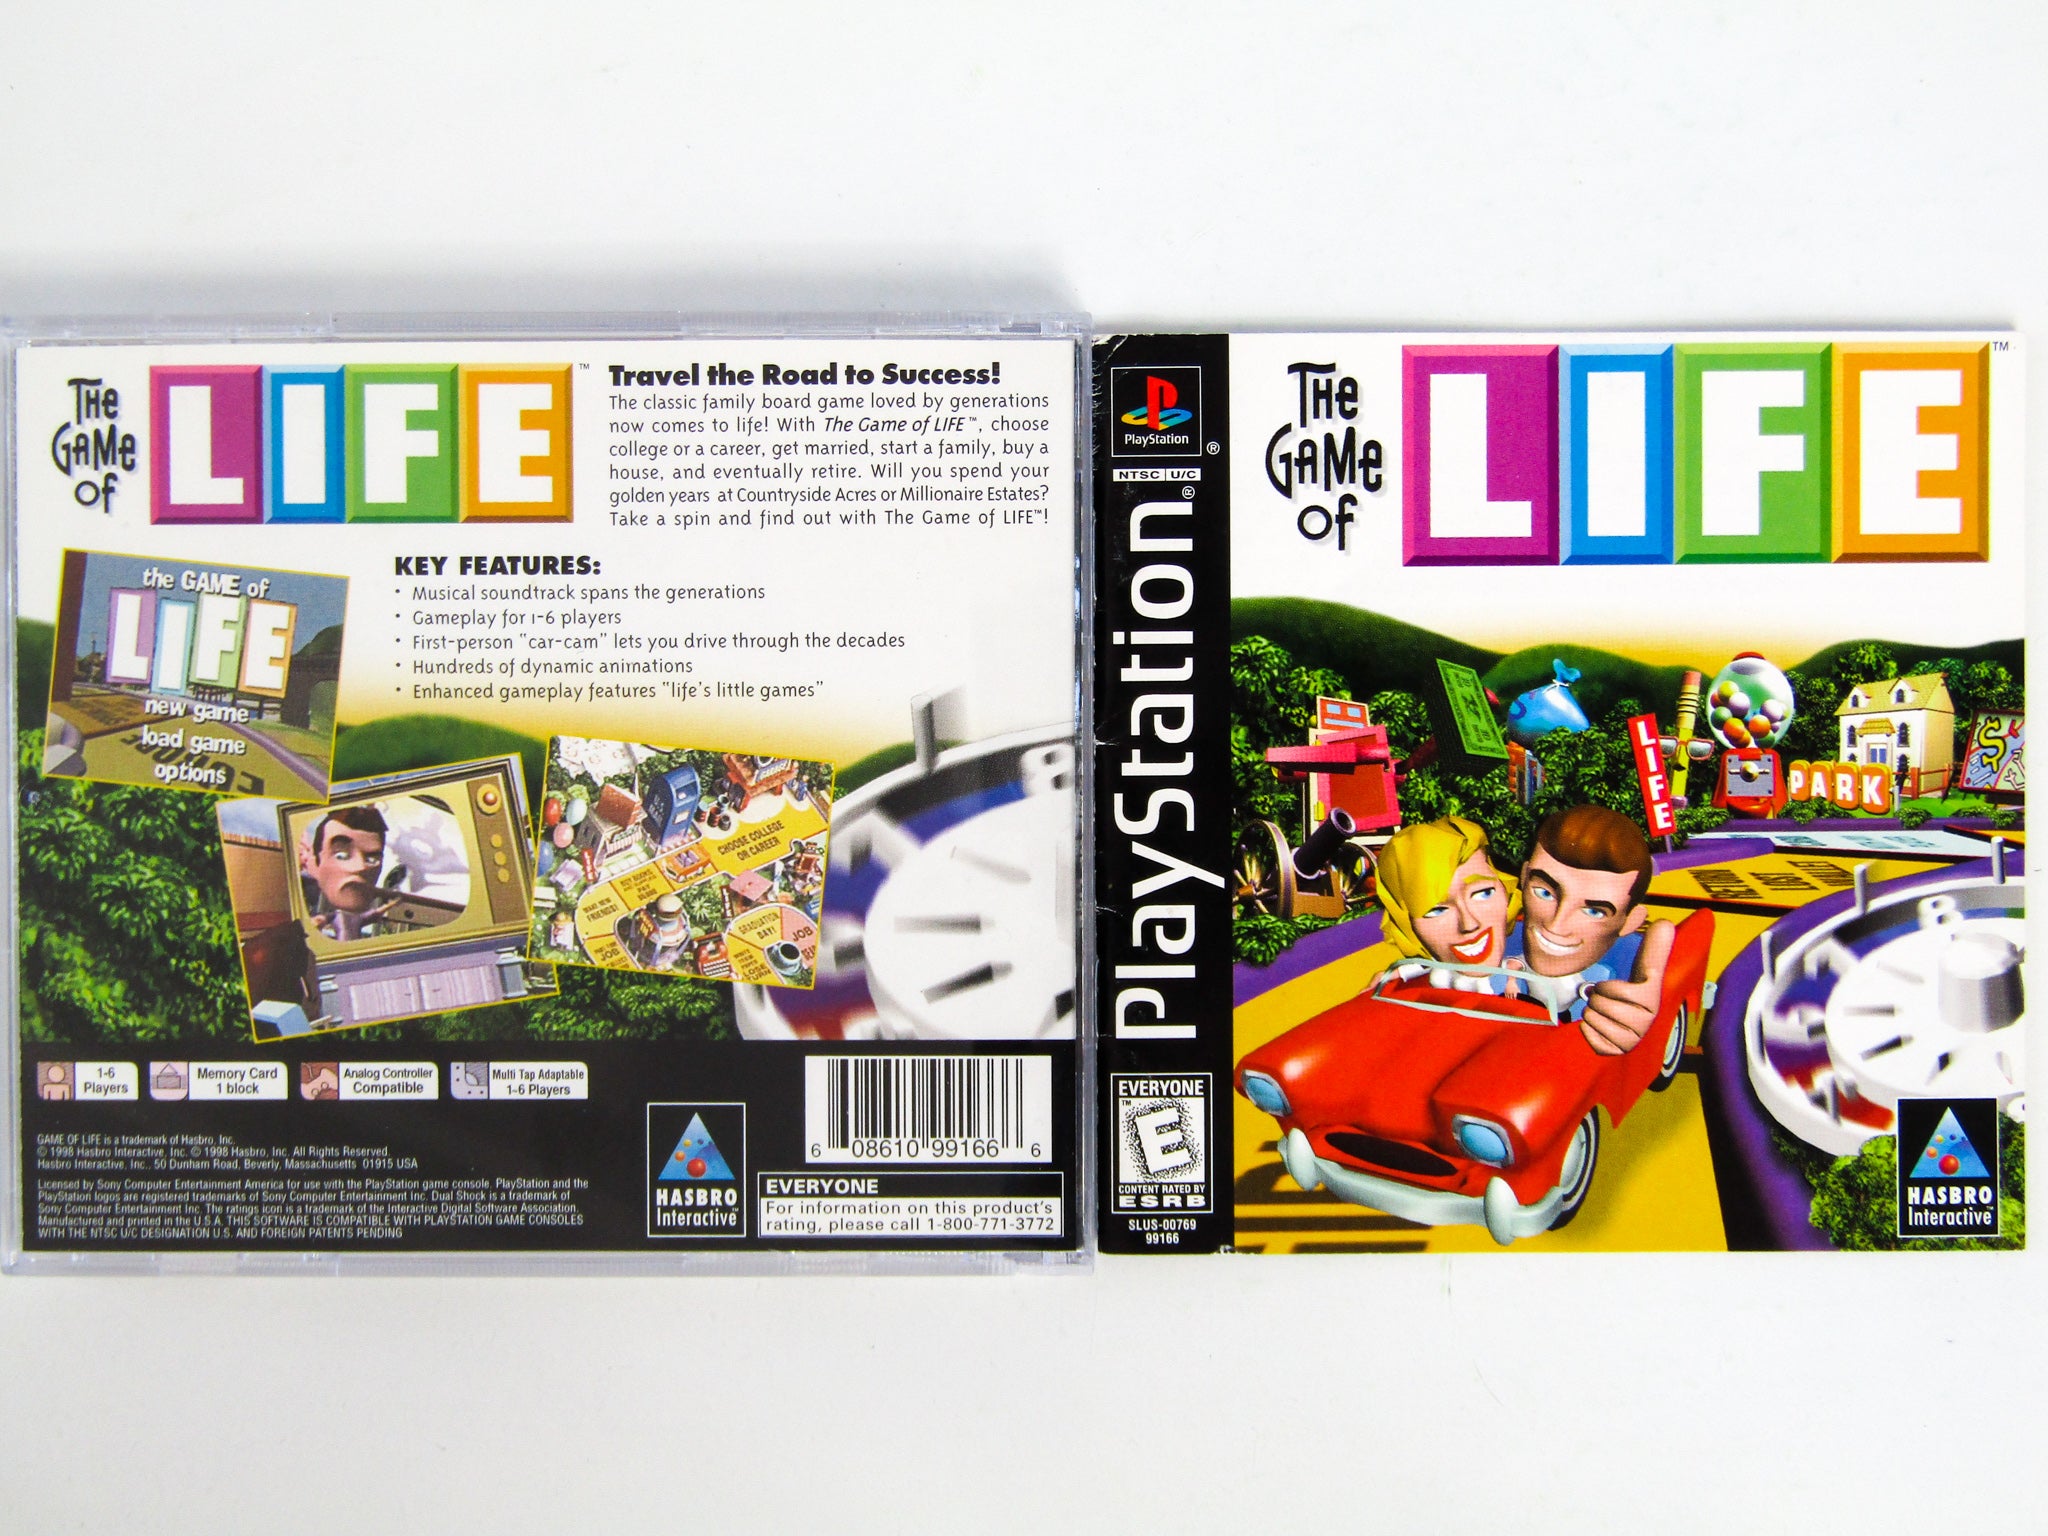 The Game Of Life - PS1 PS2 Playstation Game Complete 608610991666